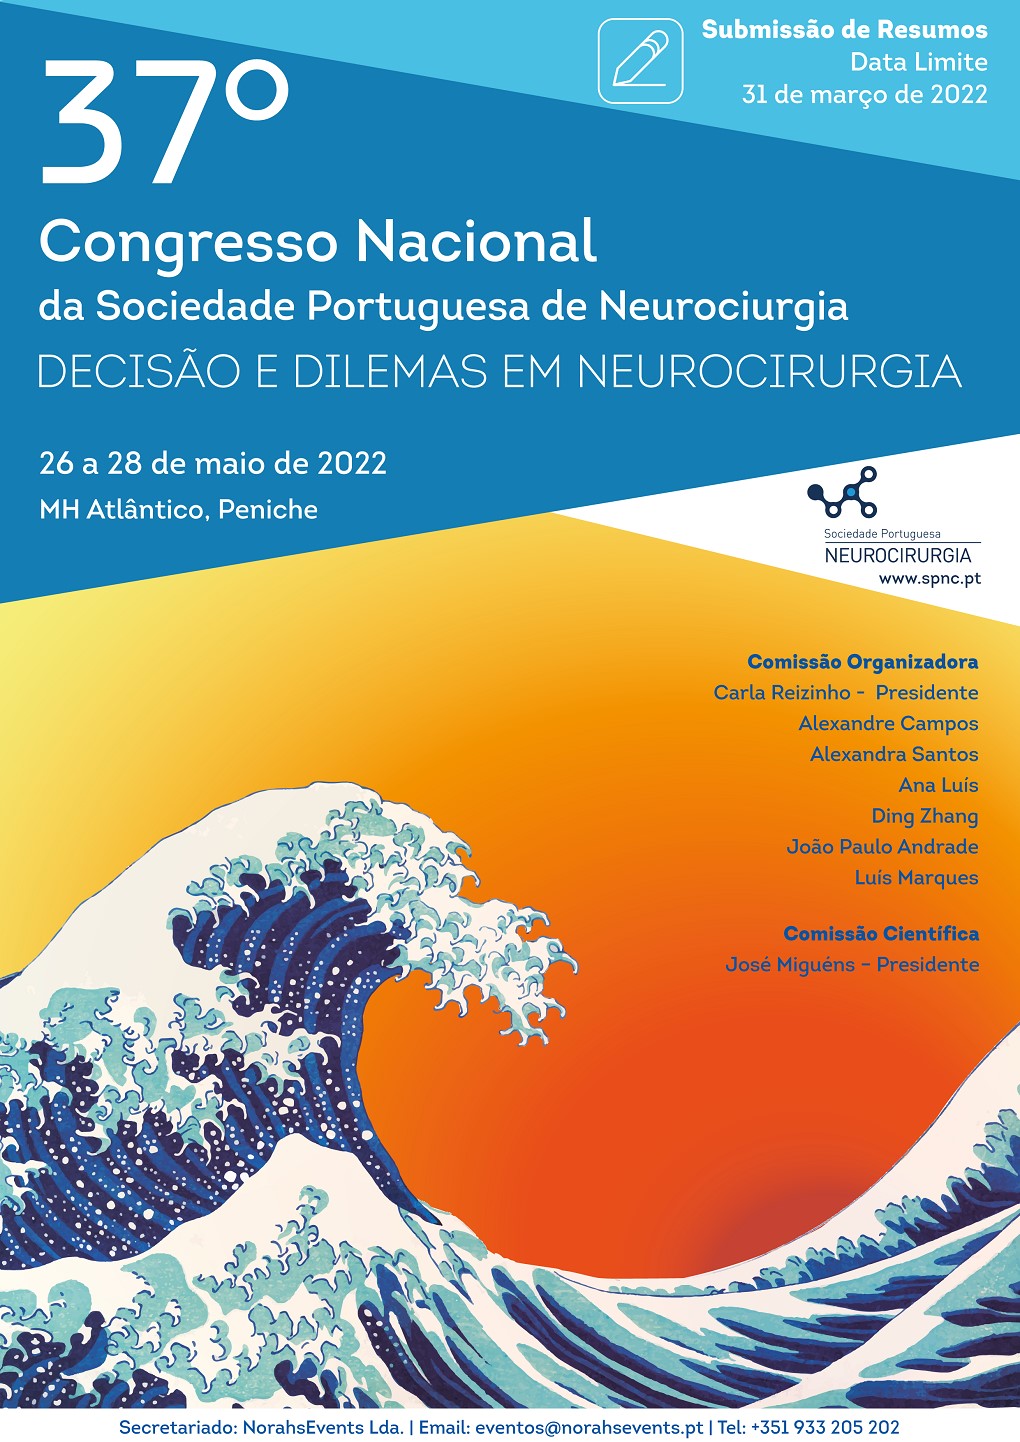  37th National Congress of the Portuguese Society of Neurosurgery 